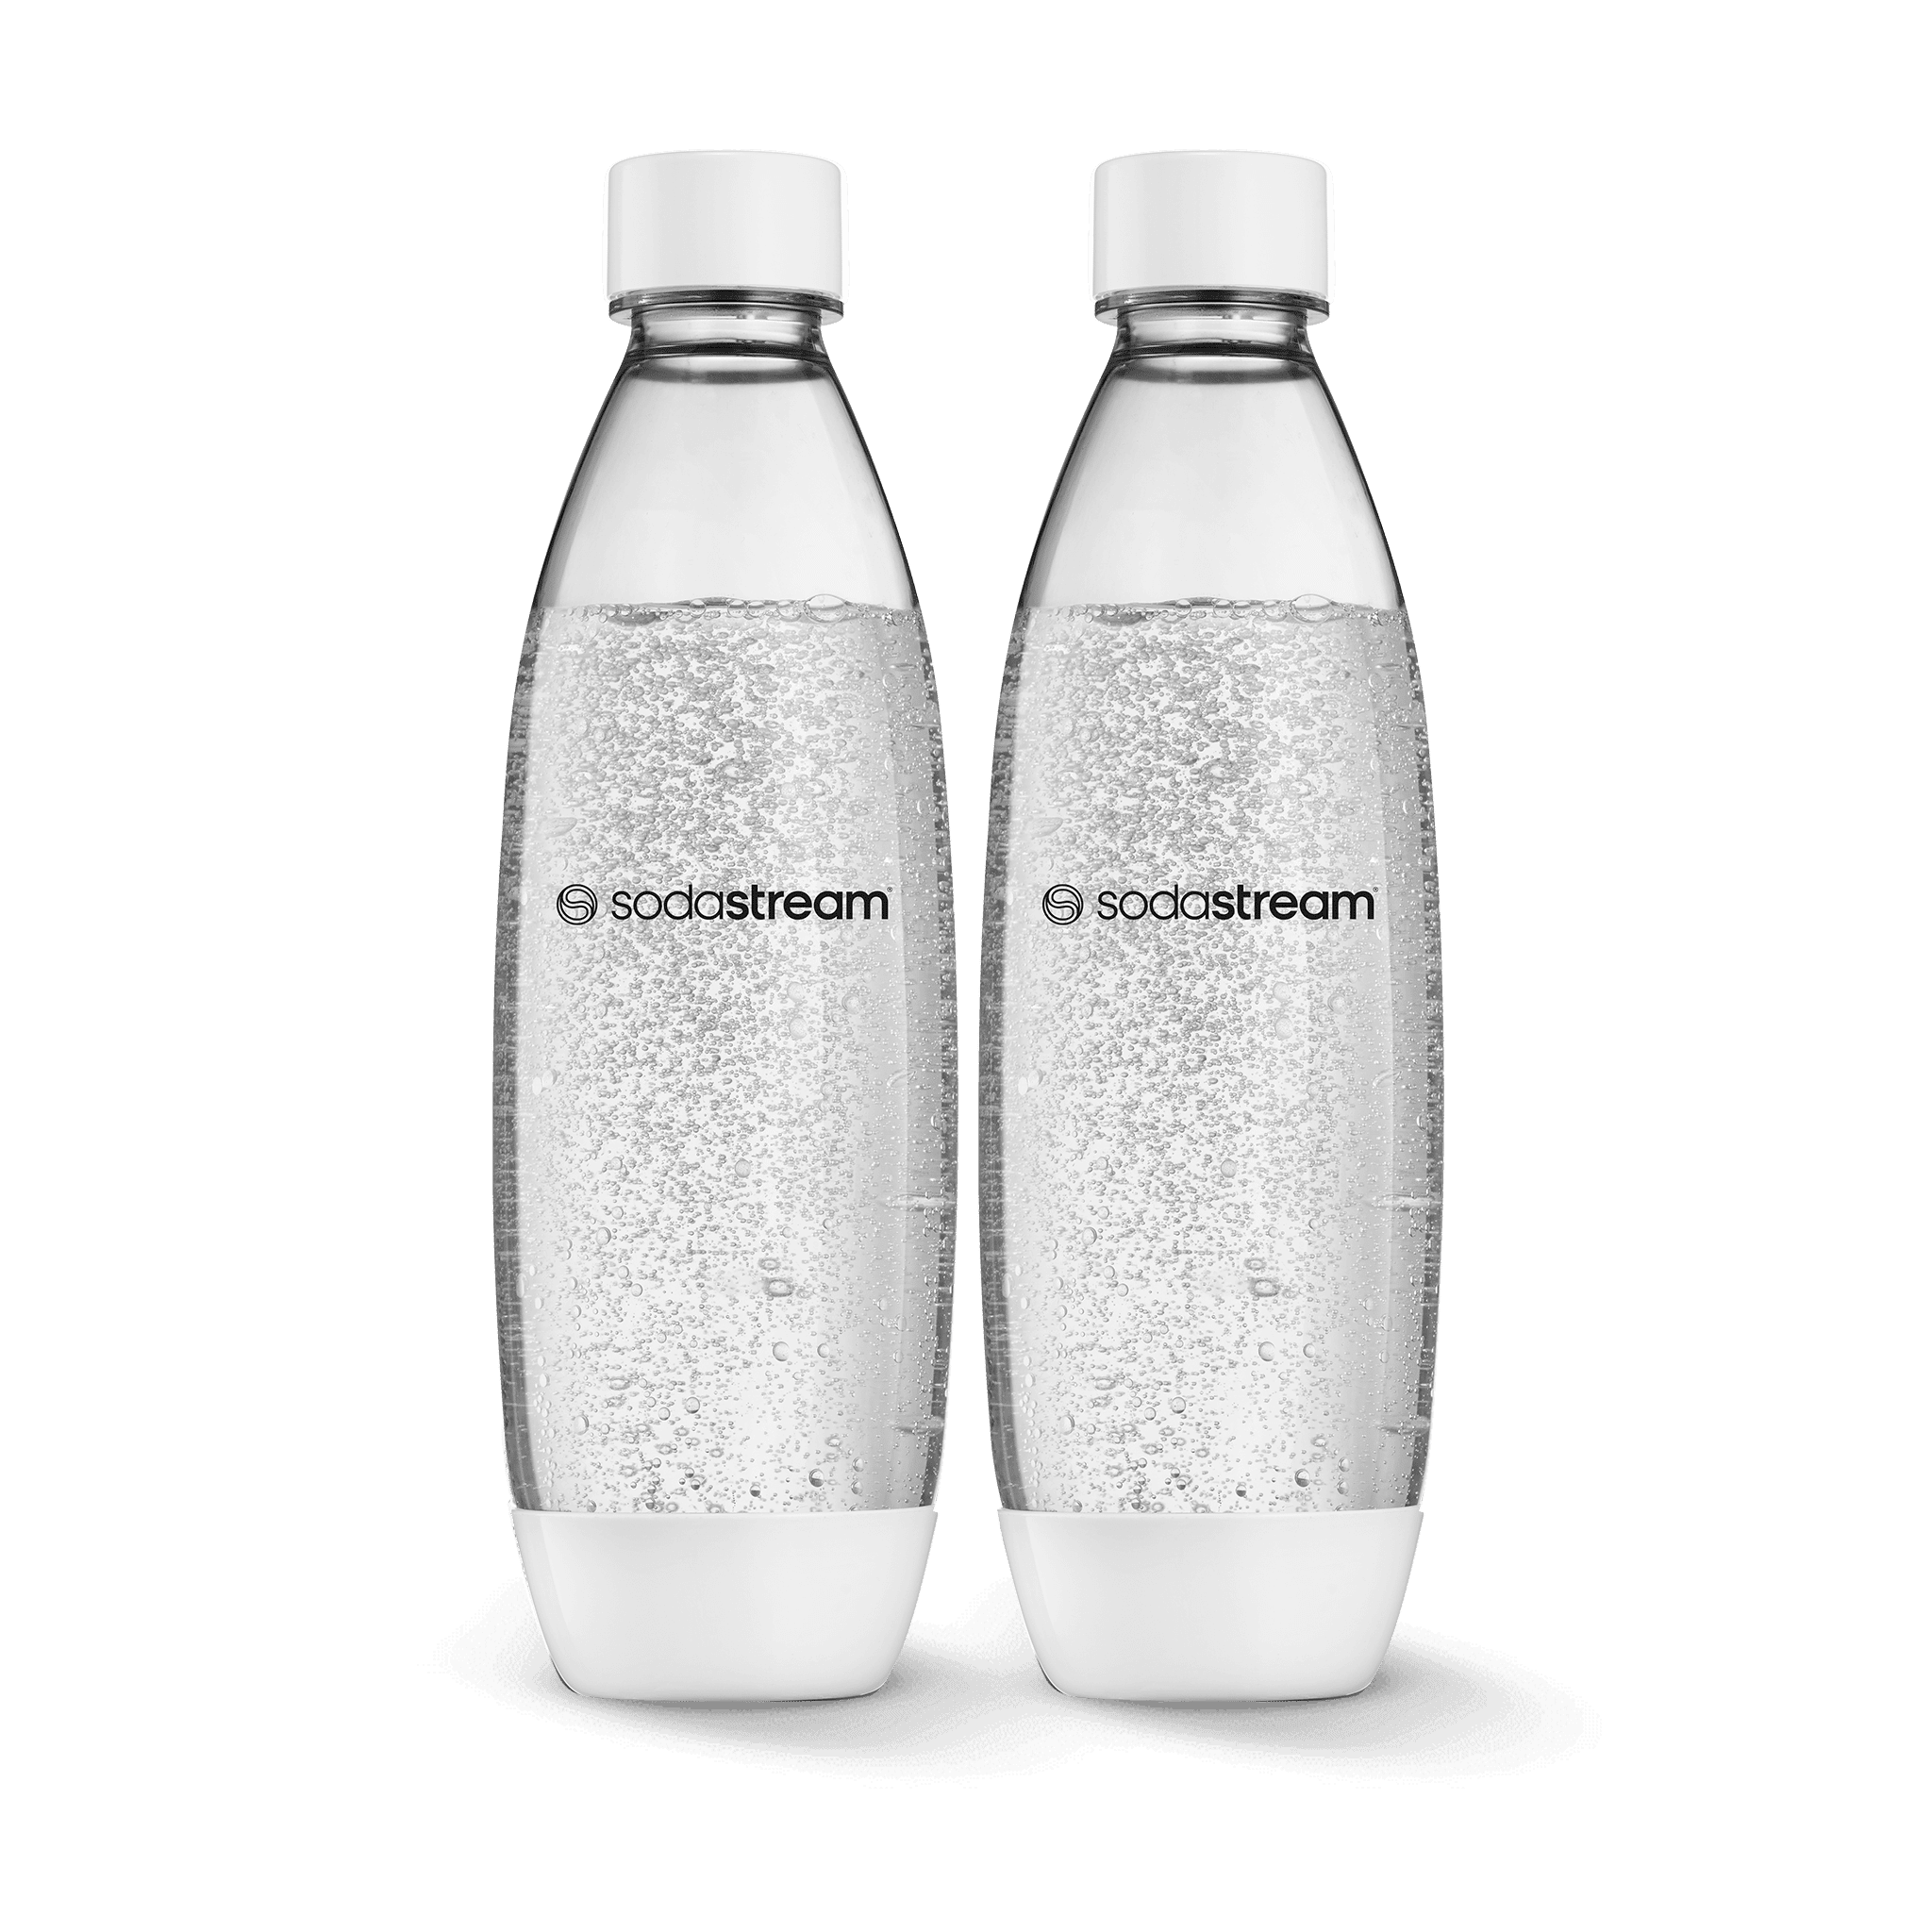 SodaStream Carbonating Bottles – The Gilded Carriage